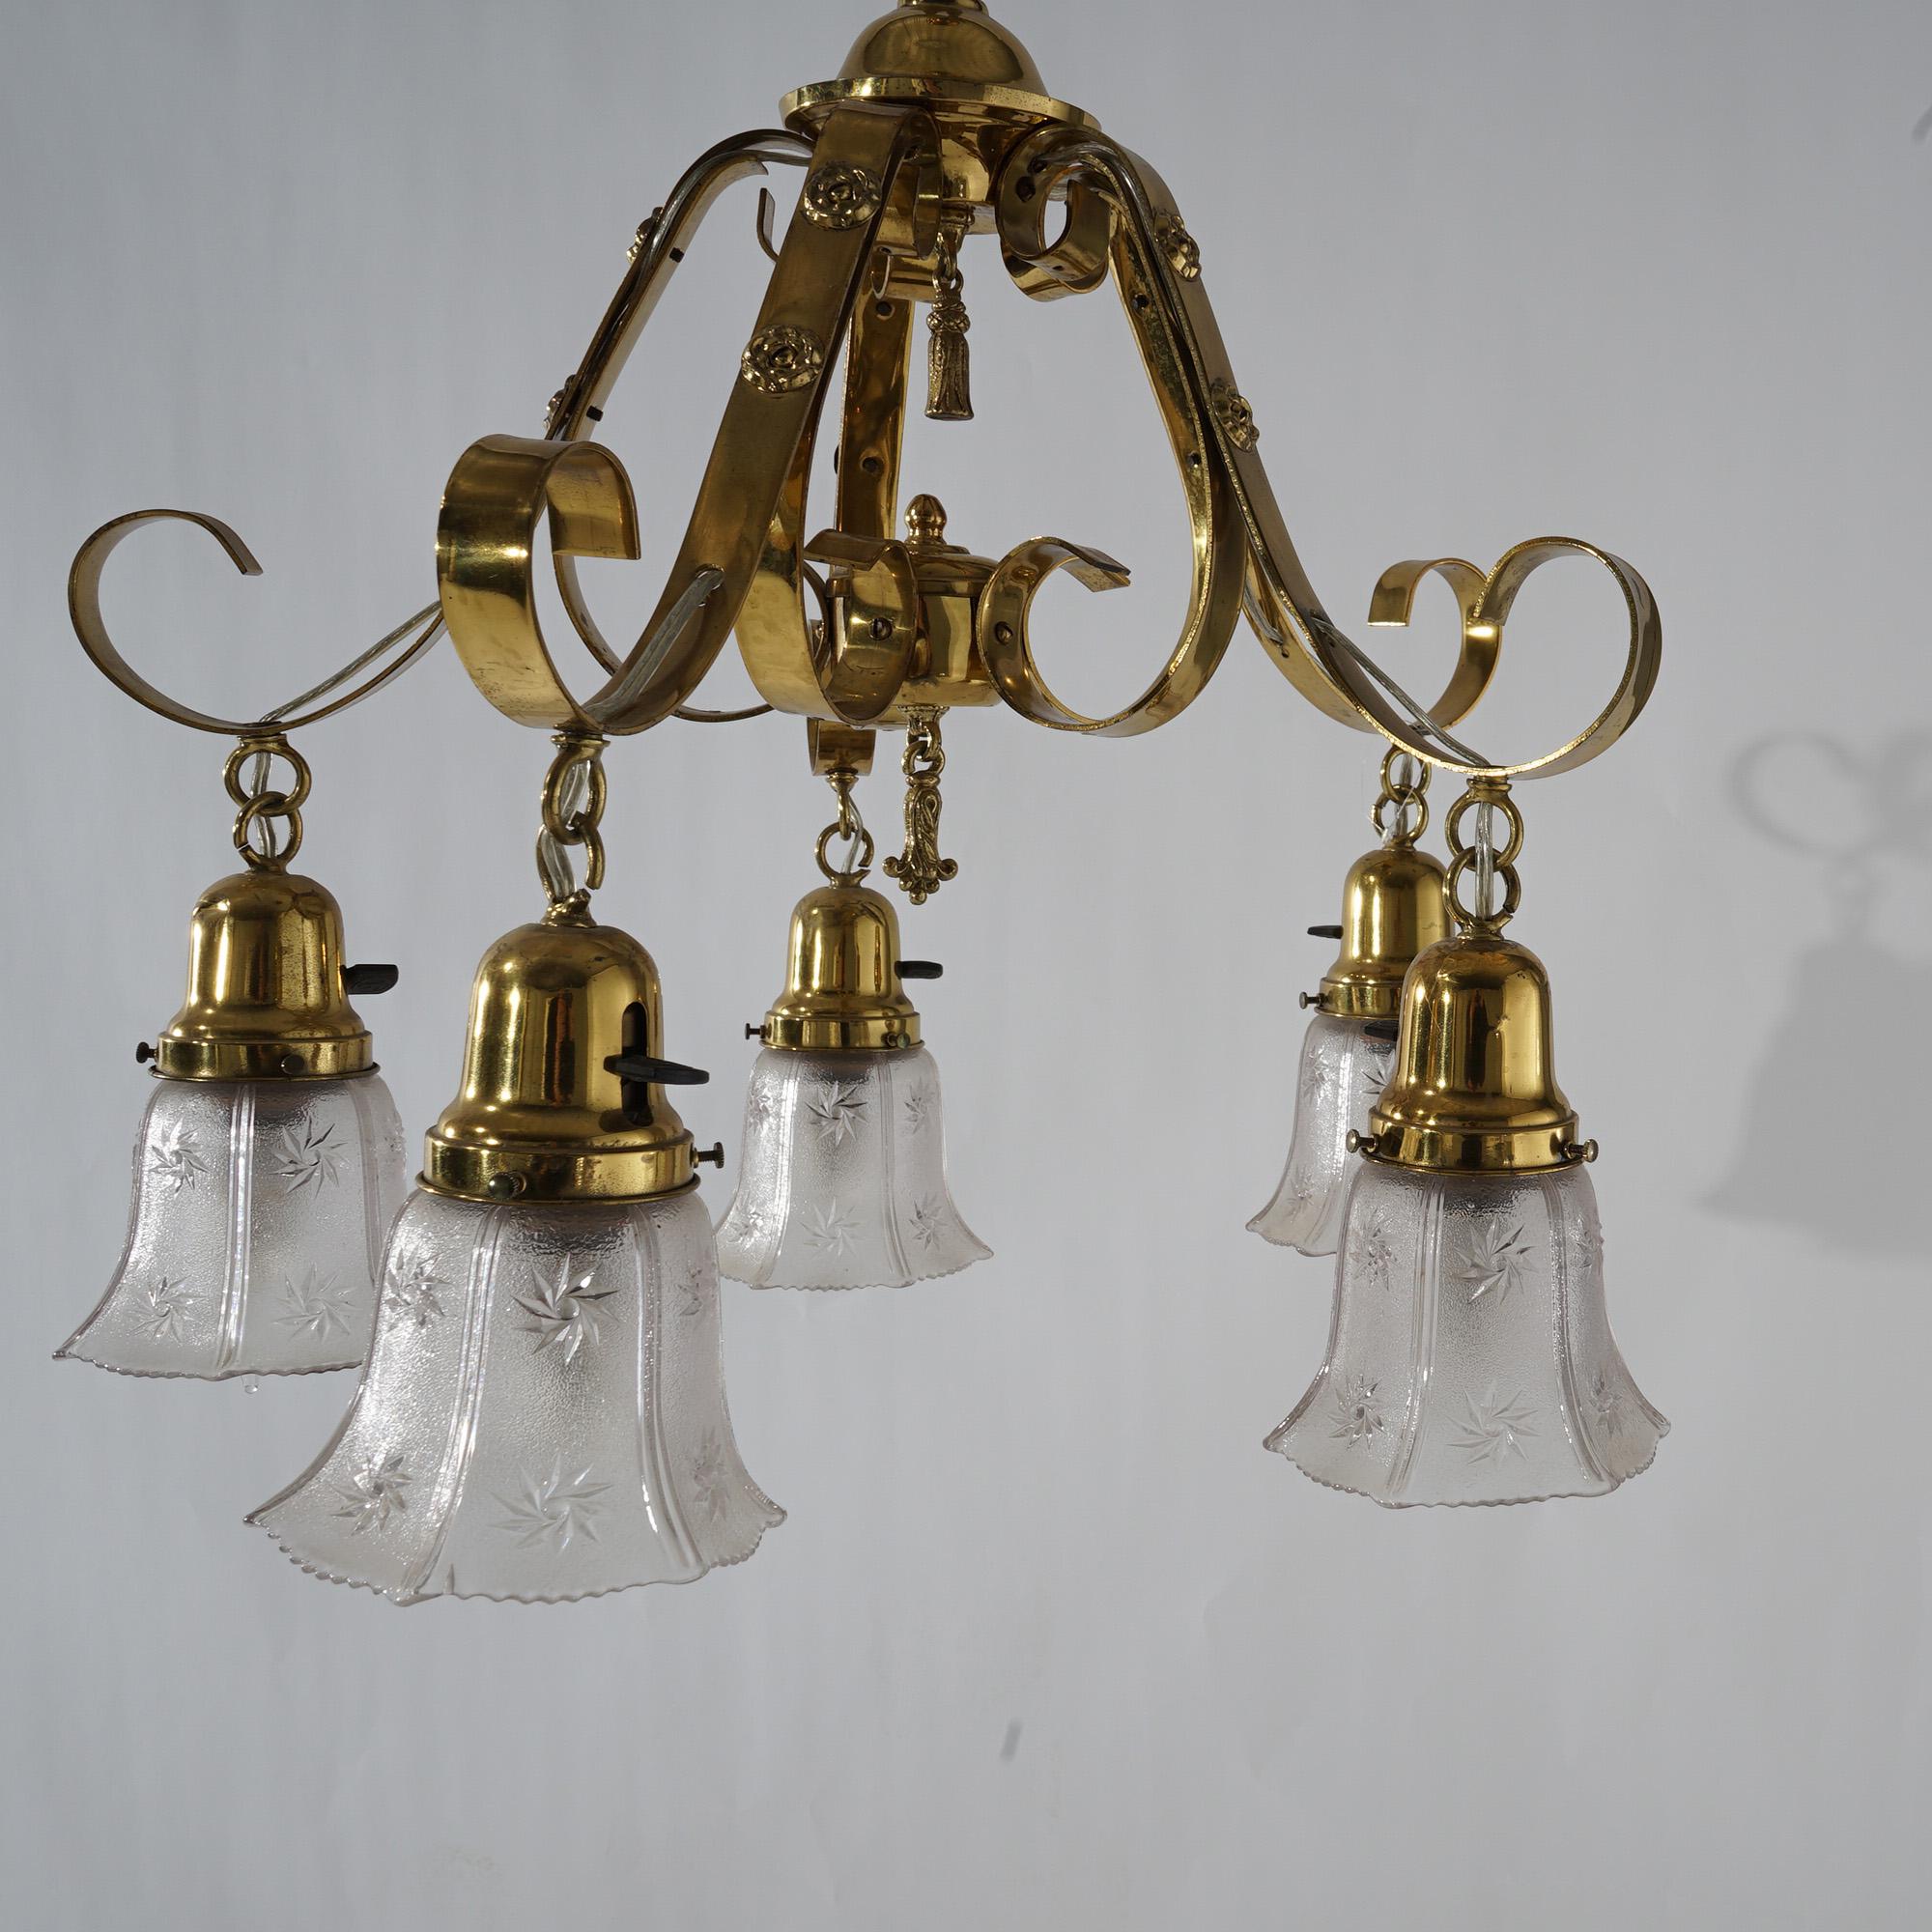 Antique Arts & Crafts Gilt Metal & Brass Hanging Fixture, Embossed Shades c1920 For Sale 3